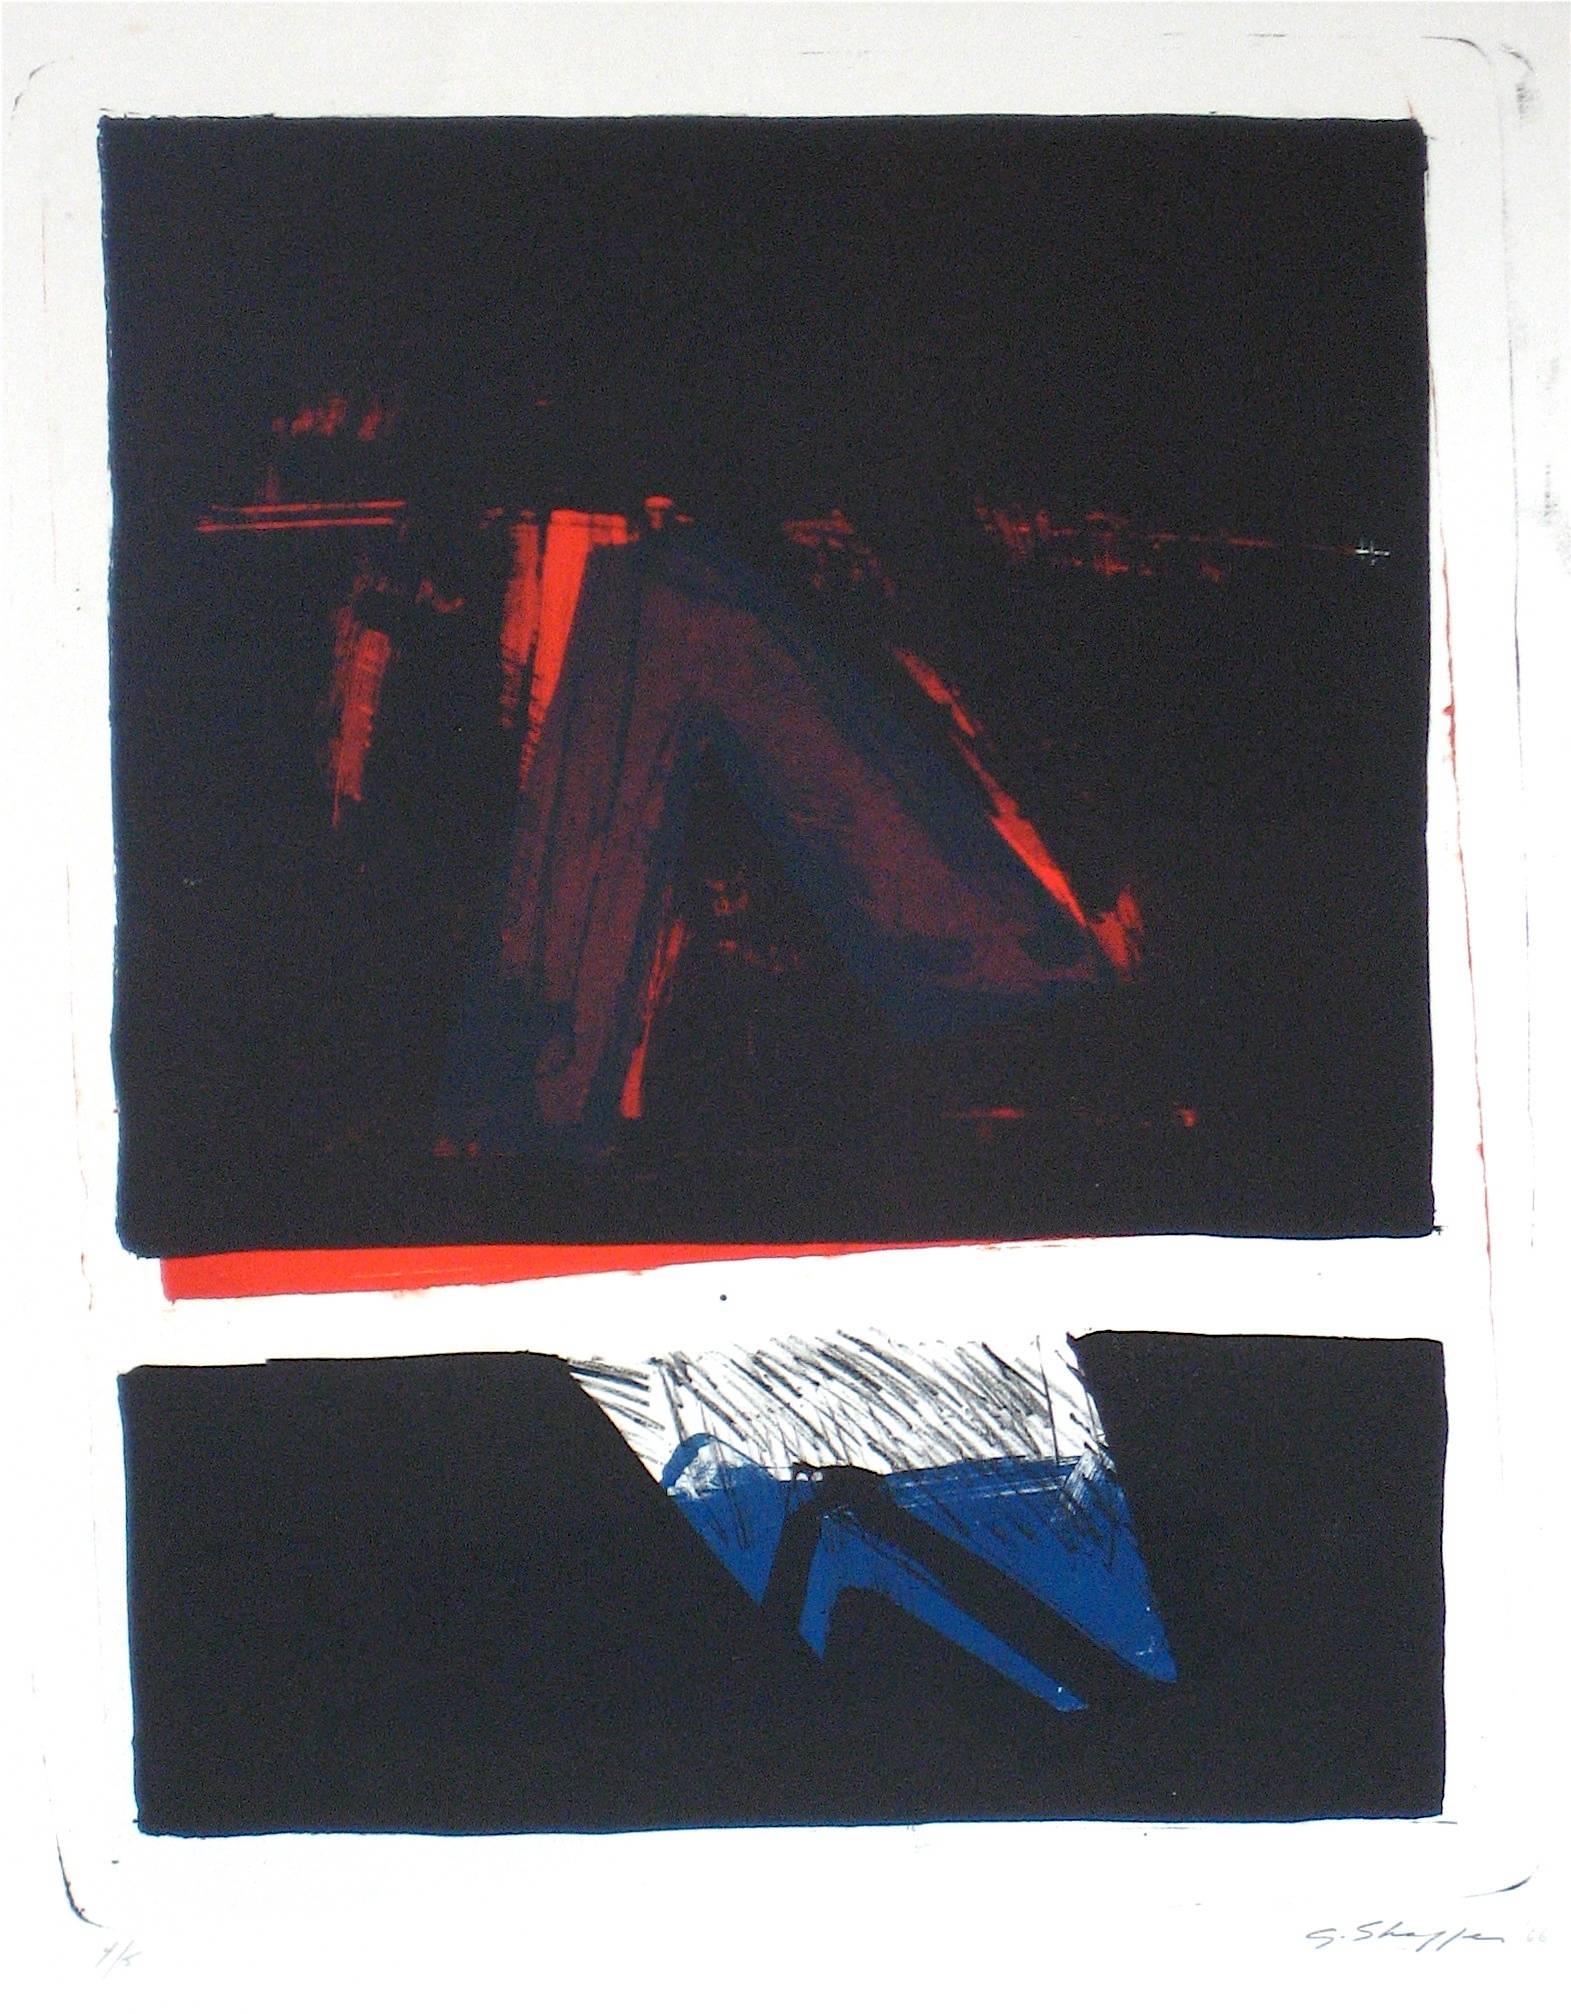 Large Abstract Expressionist Print, Stone Lithograph, 1966